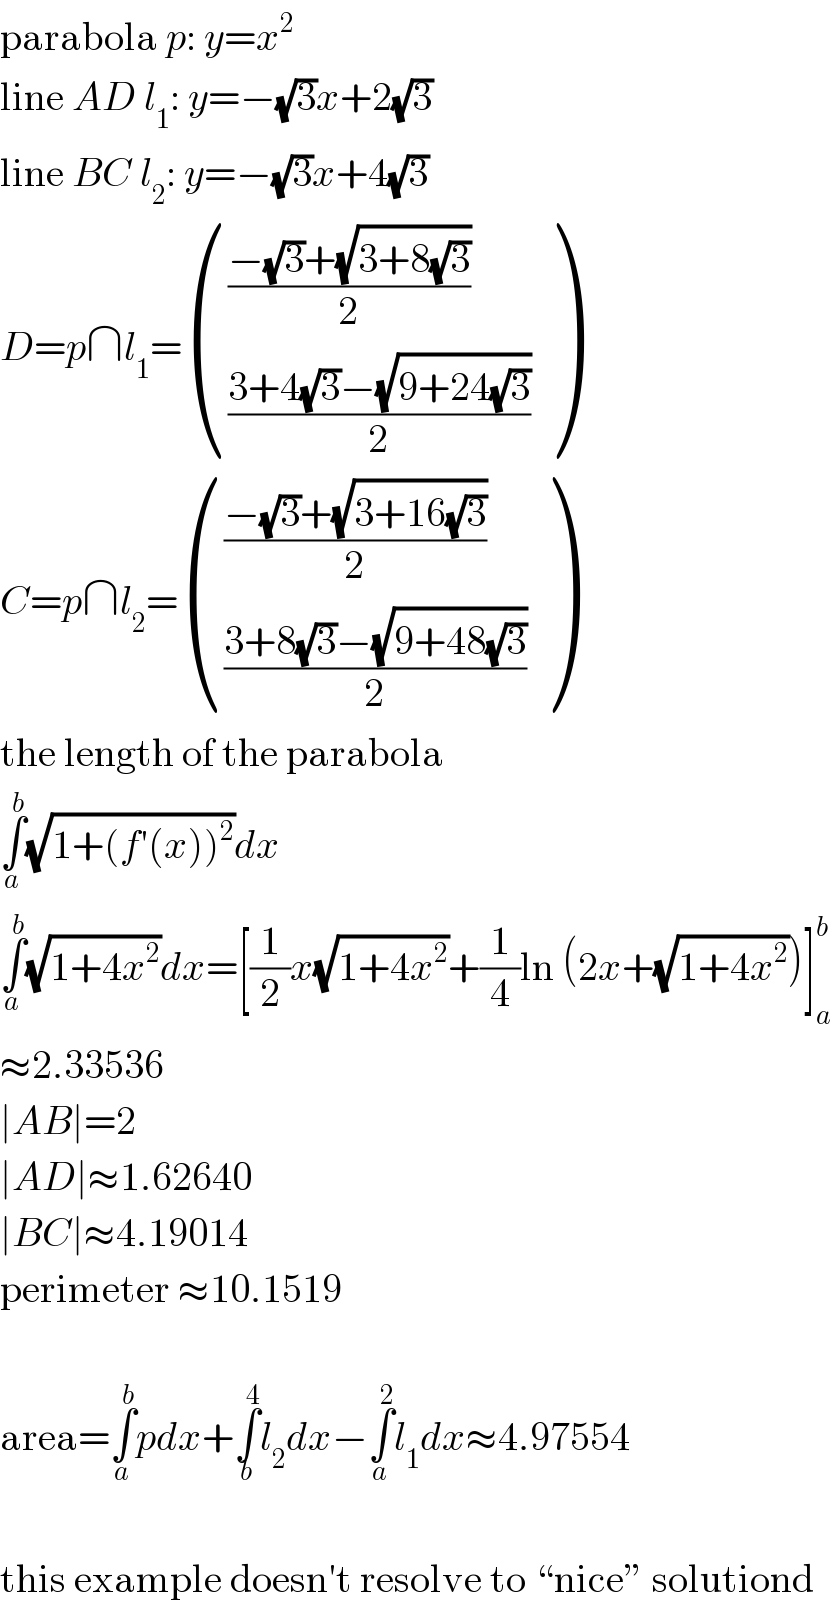 parabola p: y=x^2   line AD l_1 : y=−(√3)x+2(√3)  line BC l_2 : y=−(√3)x+4(√3)  D=p∩l_1 = ((((−(√3)+(√(3+8(√3))))/2)),(((3+4(√3)−(√(9+24(√3))))/2)) )  C=p∩l_2 = ((((−(√3)+(√(3+16(√3))))/2)),(((3+8(√3)−(√(9+48(√3))))/2)) )  the length of the parabola  ∫_a ^b (√(1+(f′(x))^2 ))dx  ∫_a ^b (√(1+4x^2 ))dx=[(1/2)x(√(1+4x^2 ))+(1/4)ln (2x+(√(1+4x^2 )))]_a ^b   ≈2.33536  ∣AB∣=2  ∣AD∣≈1.62640  ∣BC∣≈4.19014  perimeter ≈10.1519    area=∫_a ^b pdx+∫_b ^4 l_2 dx−∫_a ^2 l_1 dx≈4.97554    this example doesn′t resolve to “nice” solutiond  